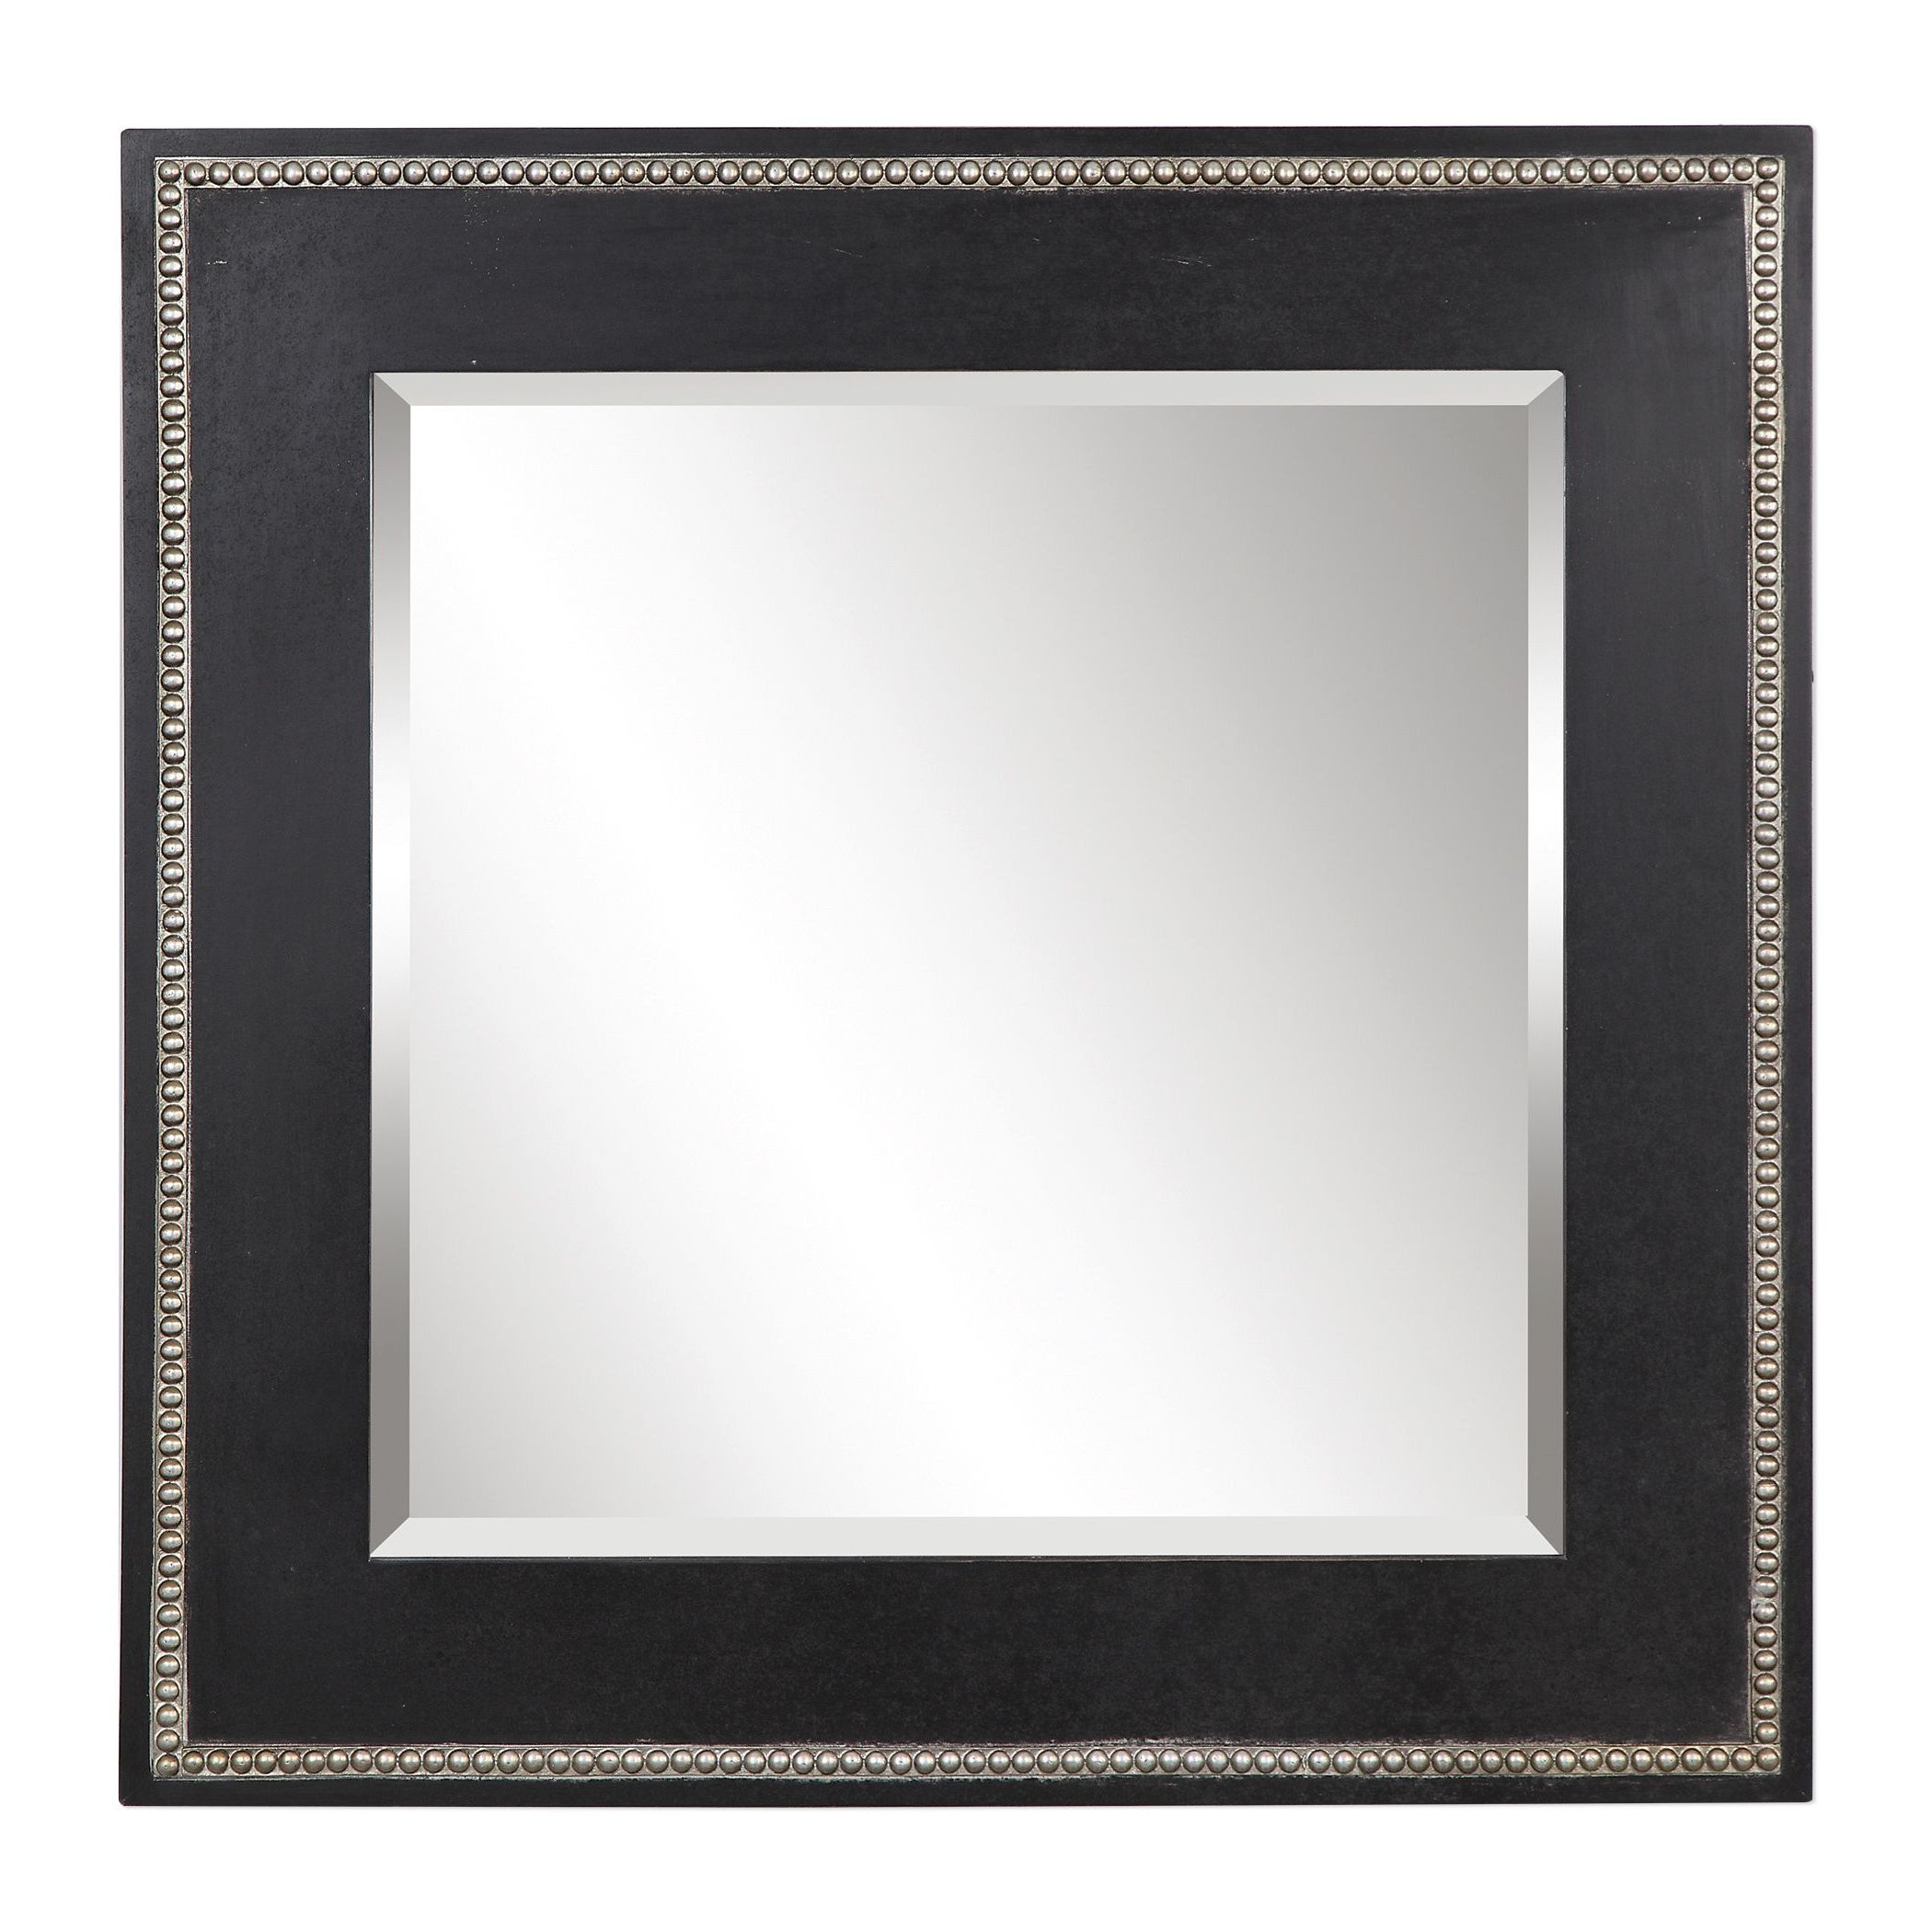 Latest Silver Beaded Square Wall Mirrors Pertaining To Large Black Square Beveled Wall Mirror Contemporary Style Traditional (View 11 of 15)